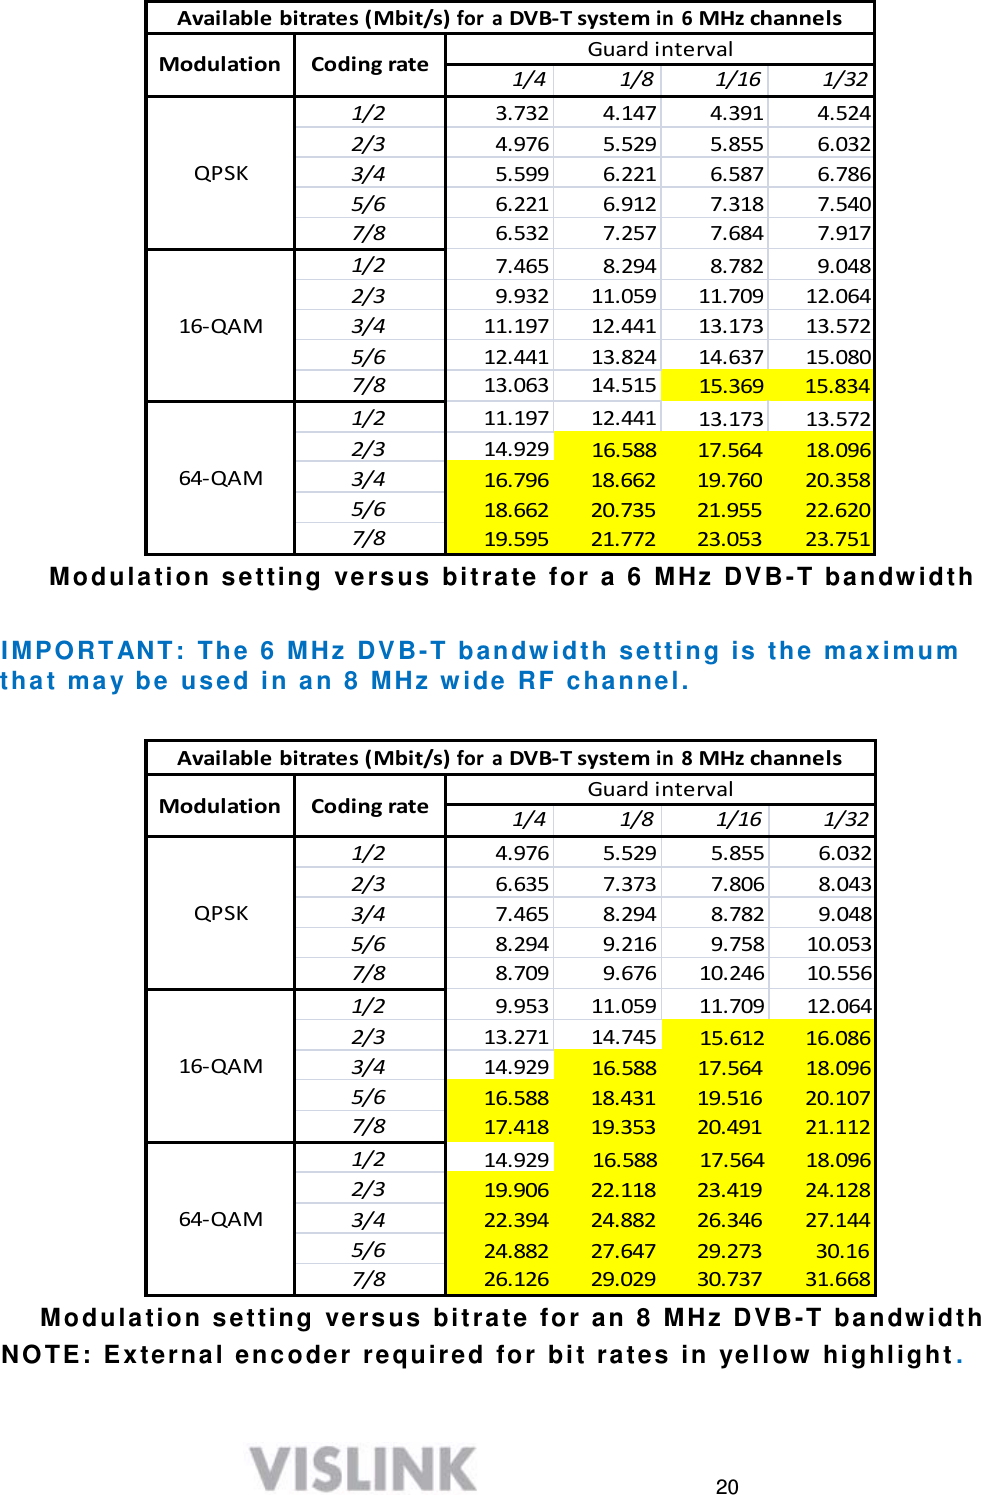  20   Available bitrates (Mbit/s) for  a DVB-T system in  6 MHz channels  Modulation  Coding rate Guard interval 1/4 1/8 1/16 1/32    QPSK 1/2 3.732 4.147 4.391 4.524 2/3 4.976 5.529 5.855 6.032 3/4 5.599 6.221 6.587 6.786 5/6 6.221 6.912 7.318 7.540 7/8 6.532 7.257 7.684 7.917    16-QAM 1/2 7.465 8.294 8.782 9.048 2/3 9.932 11.059 11.709 12.064 3/4 11.197 12.441 13.173 13.572 5/6 12.441 13.824 14.637 15.080 7/8 13.063 14.515 15.369 15.834    64-QAM 1/2 11.197 12.441 13.173 13.572 2/3 14.929 16.588 17.564 18.096 3/4 16.796 18.662 19.760 20.358 18.662 20.735 21.955 22.620 19.595 21.772 23.053 23.751 5/6 7/8 M o d u l a t i o n  s e t t i n g  v e r s u s  b i t r a t e  f o r  a  6  M H z  D V B - T  b a n d w i d t h   I M P O R T A N T :  T h e  6  M H z  D V B - T  b a n d w i d t h  s e t t i n g  i s  t h e  m a x i m u m t h a t  m a y  b e  u s e d  i n  a n  8  M H z  w i d e  R F  c h a n n e l .   Available bitrates (Mbit/s) for  a DVB-T system in  8 MHz channels  Modulation  Coding rate Guard interval 1/4 1/8 1/16 1/32    QPSK 1/2 4.976 5.529 5.855 6.032 2/3 6.635 7.373 7.806 8.043 3/4 7.465 8.294 8.782 9.048 5/6 8.294 9.216 9.758 10.053 7/8 8.709 9.676 10.246 10.556    16-QAM 1/2 9.953 11.059 11.709 12.064 2/3 13.271 14.745 15.612 16.086 3/4 14.929 16.588 17.564 18.096 5/6 16.588 18.431 19.516 20.107 17.418 19.353 20.491 21.112 7/8    64-QAM 1/2 14.929 16.588 17.564 18.096 2/3 19.906 22.118 23.419 24.128 22.394 24.882 26.346 27.144 24.882 27.647 29.273 30.16 26.126 29.029 30.737 31.668 3/4 5/6 7/8 M o d u l a t i o n  s e t t i n g  v e r s u s  b i t r a t e  f o r  a n  8  M H z  D V B - T  b a n d w i d t h N O T E :  E x t e r n a l  e n c o d e r  r e q u i r e d  f o r  b i t  r a t e s  i n  y e l l o w  h i g h l i g h t . 